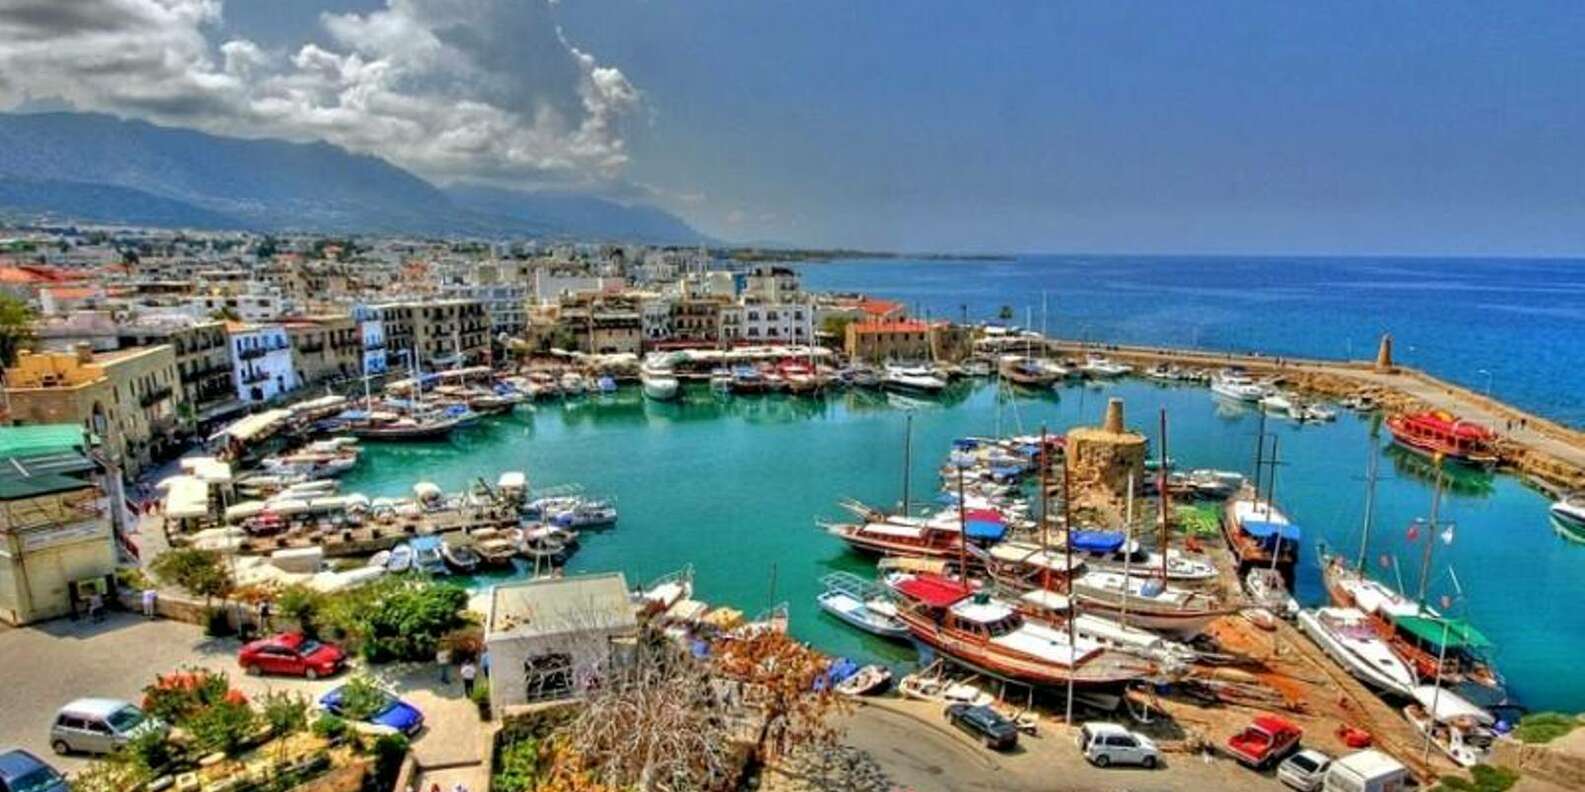 What to do in Kyrenia